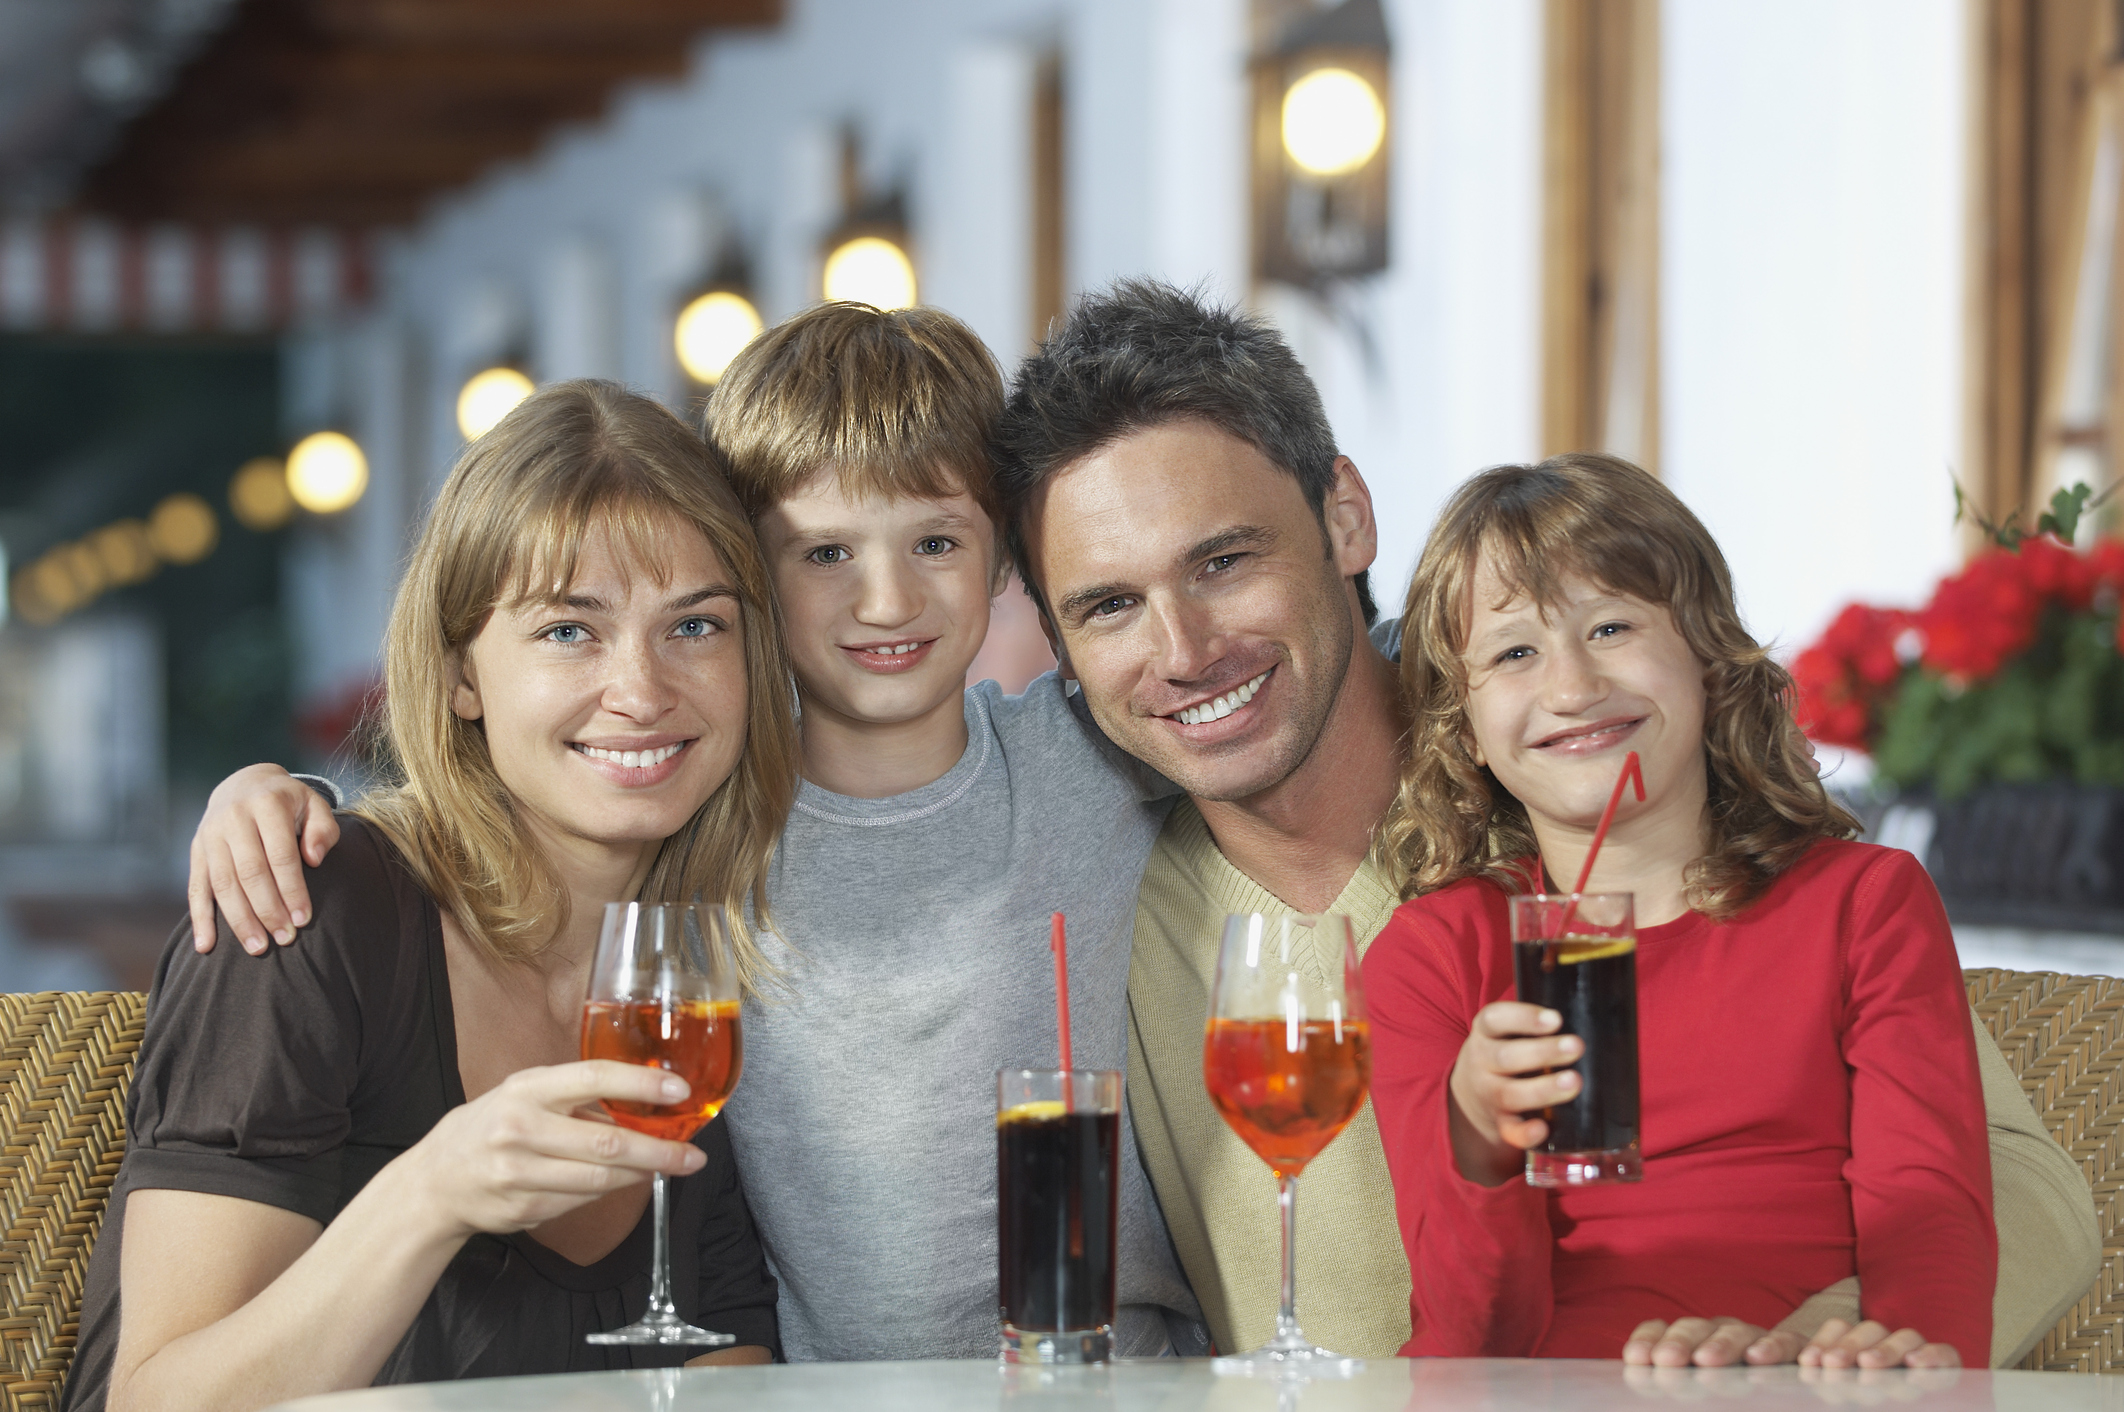 Parents and children (7-9) with drinks at restaurant portrait